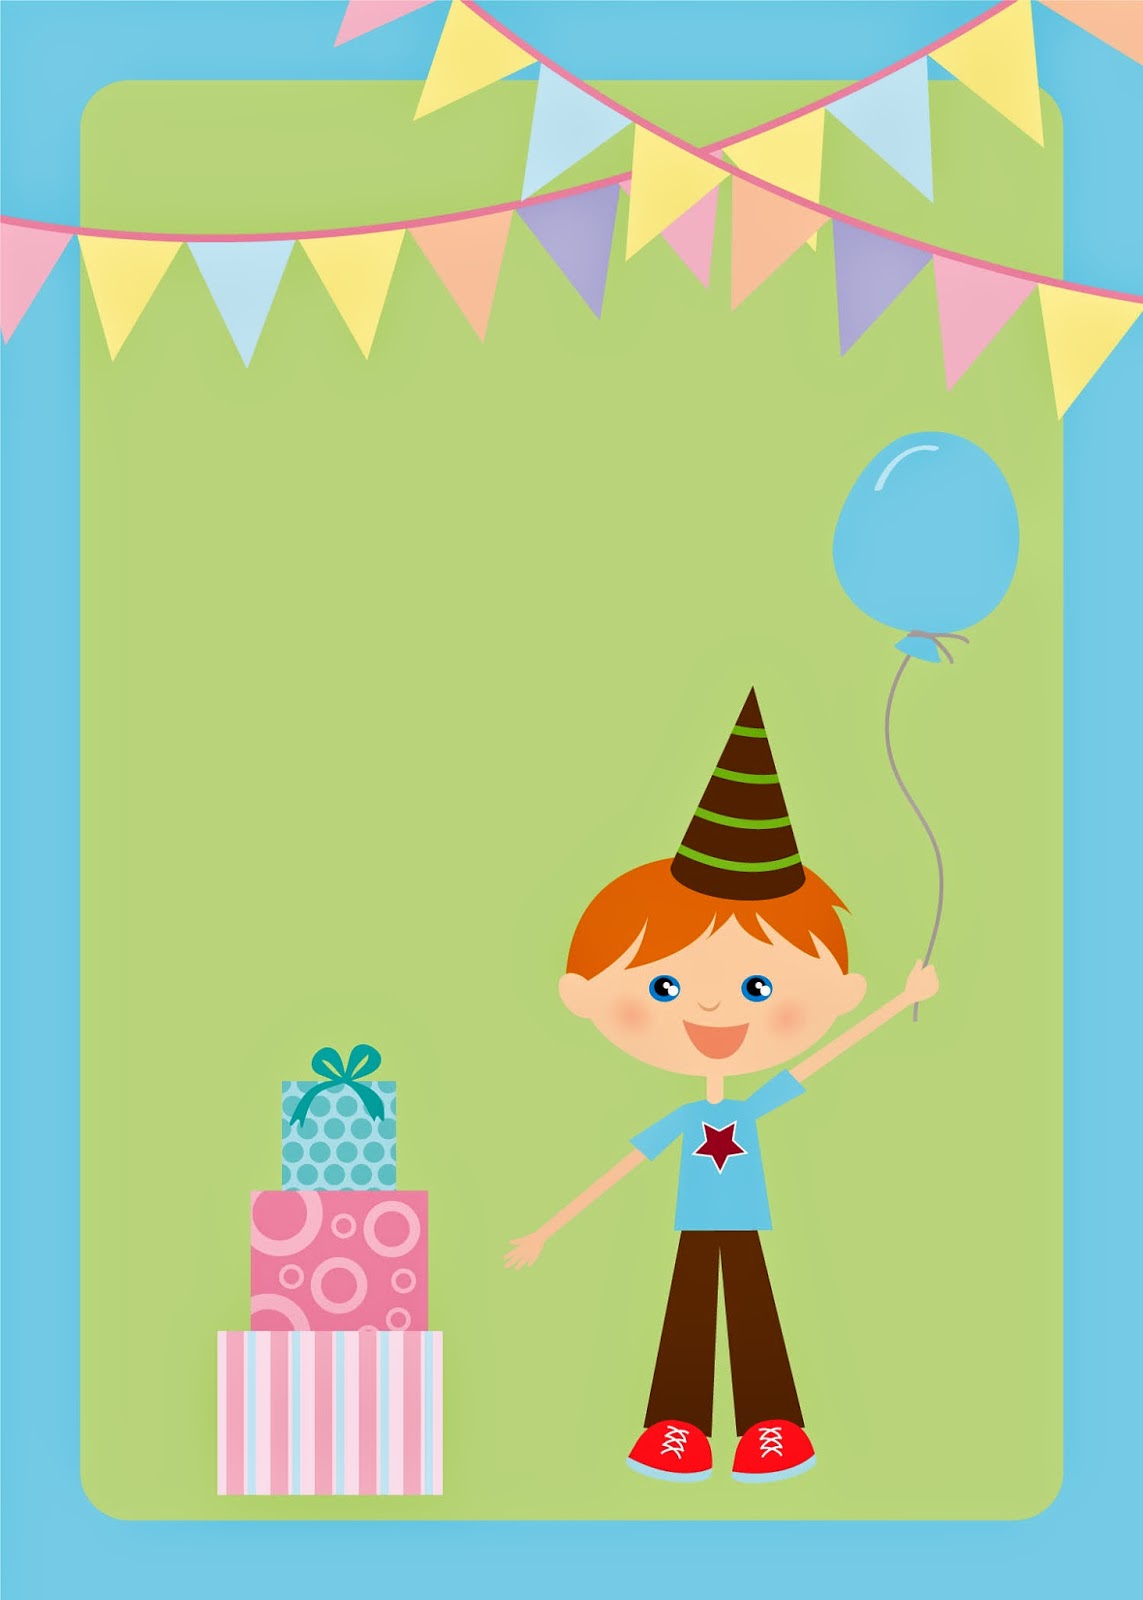 kids-birthday-party-free-printable-invitations-oh-my-fiesta-in-english